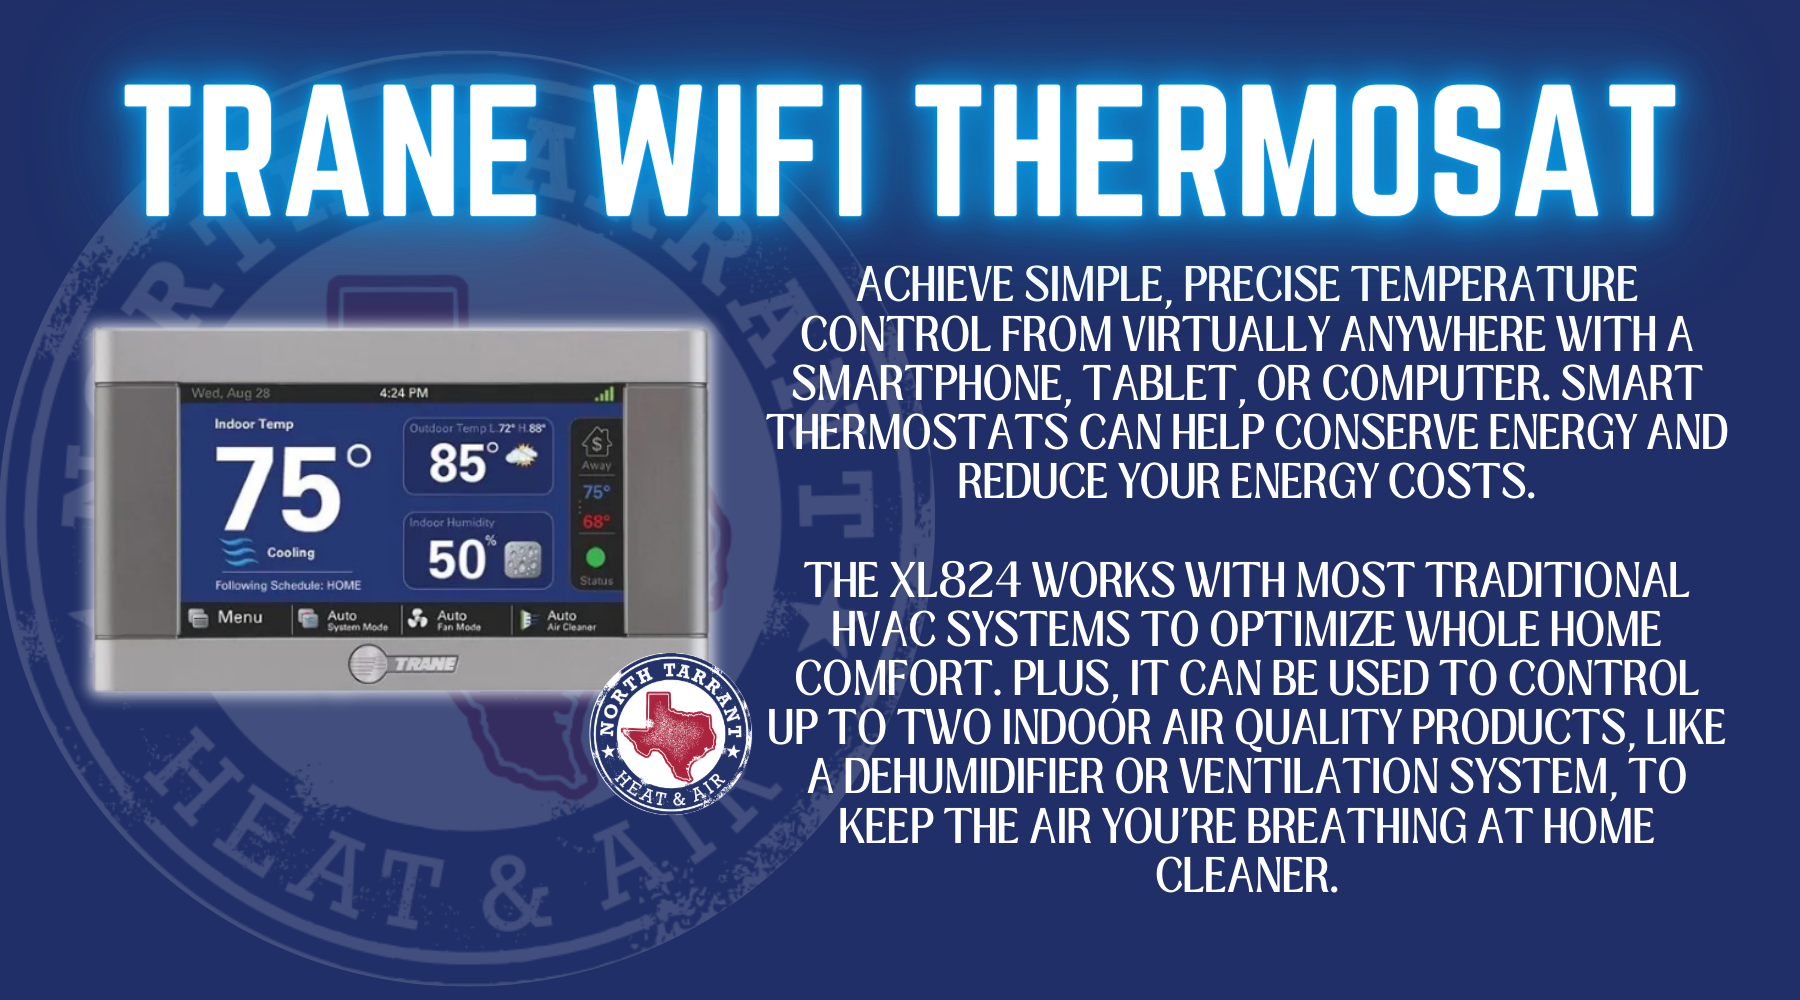 Achieve simple, precise temperature control from virtually anywhere with a smartphone, tablet, or computer. Smart thermostats can help conserve energy and reduce your energy costs. The XL824 works with most traditional HVAC systems to optimize whole home comfort. Plus, it can be used to control up to two indoor air quality products, like a dehumidifier or ventilation system, to keep the air you're breathing at home cleaner.